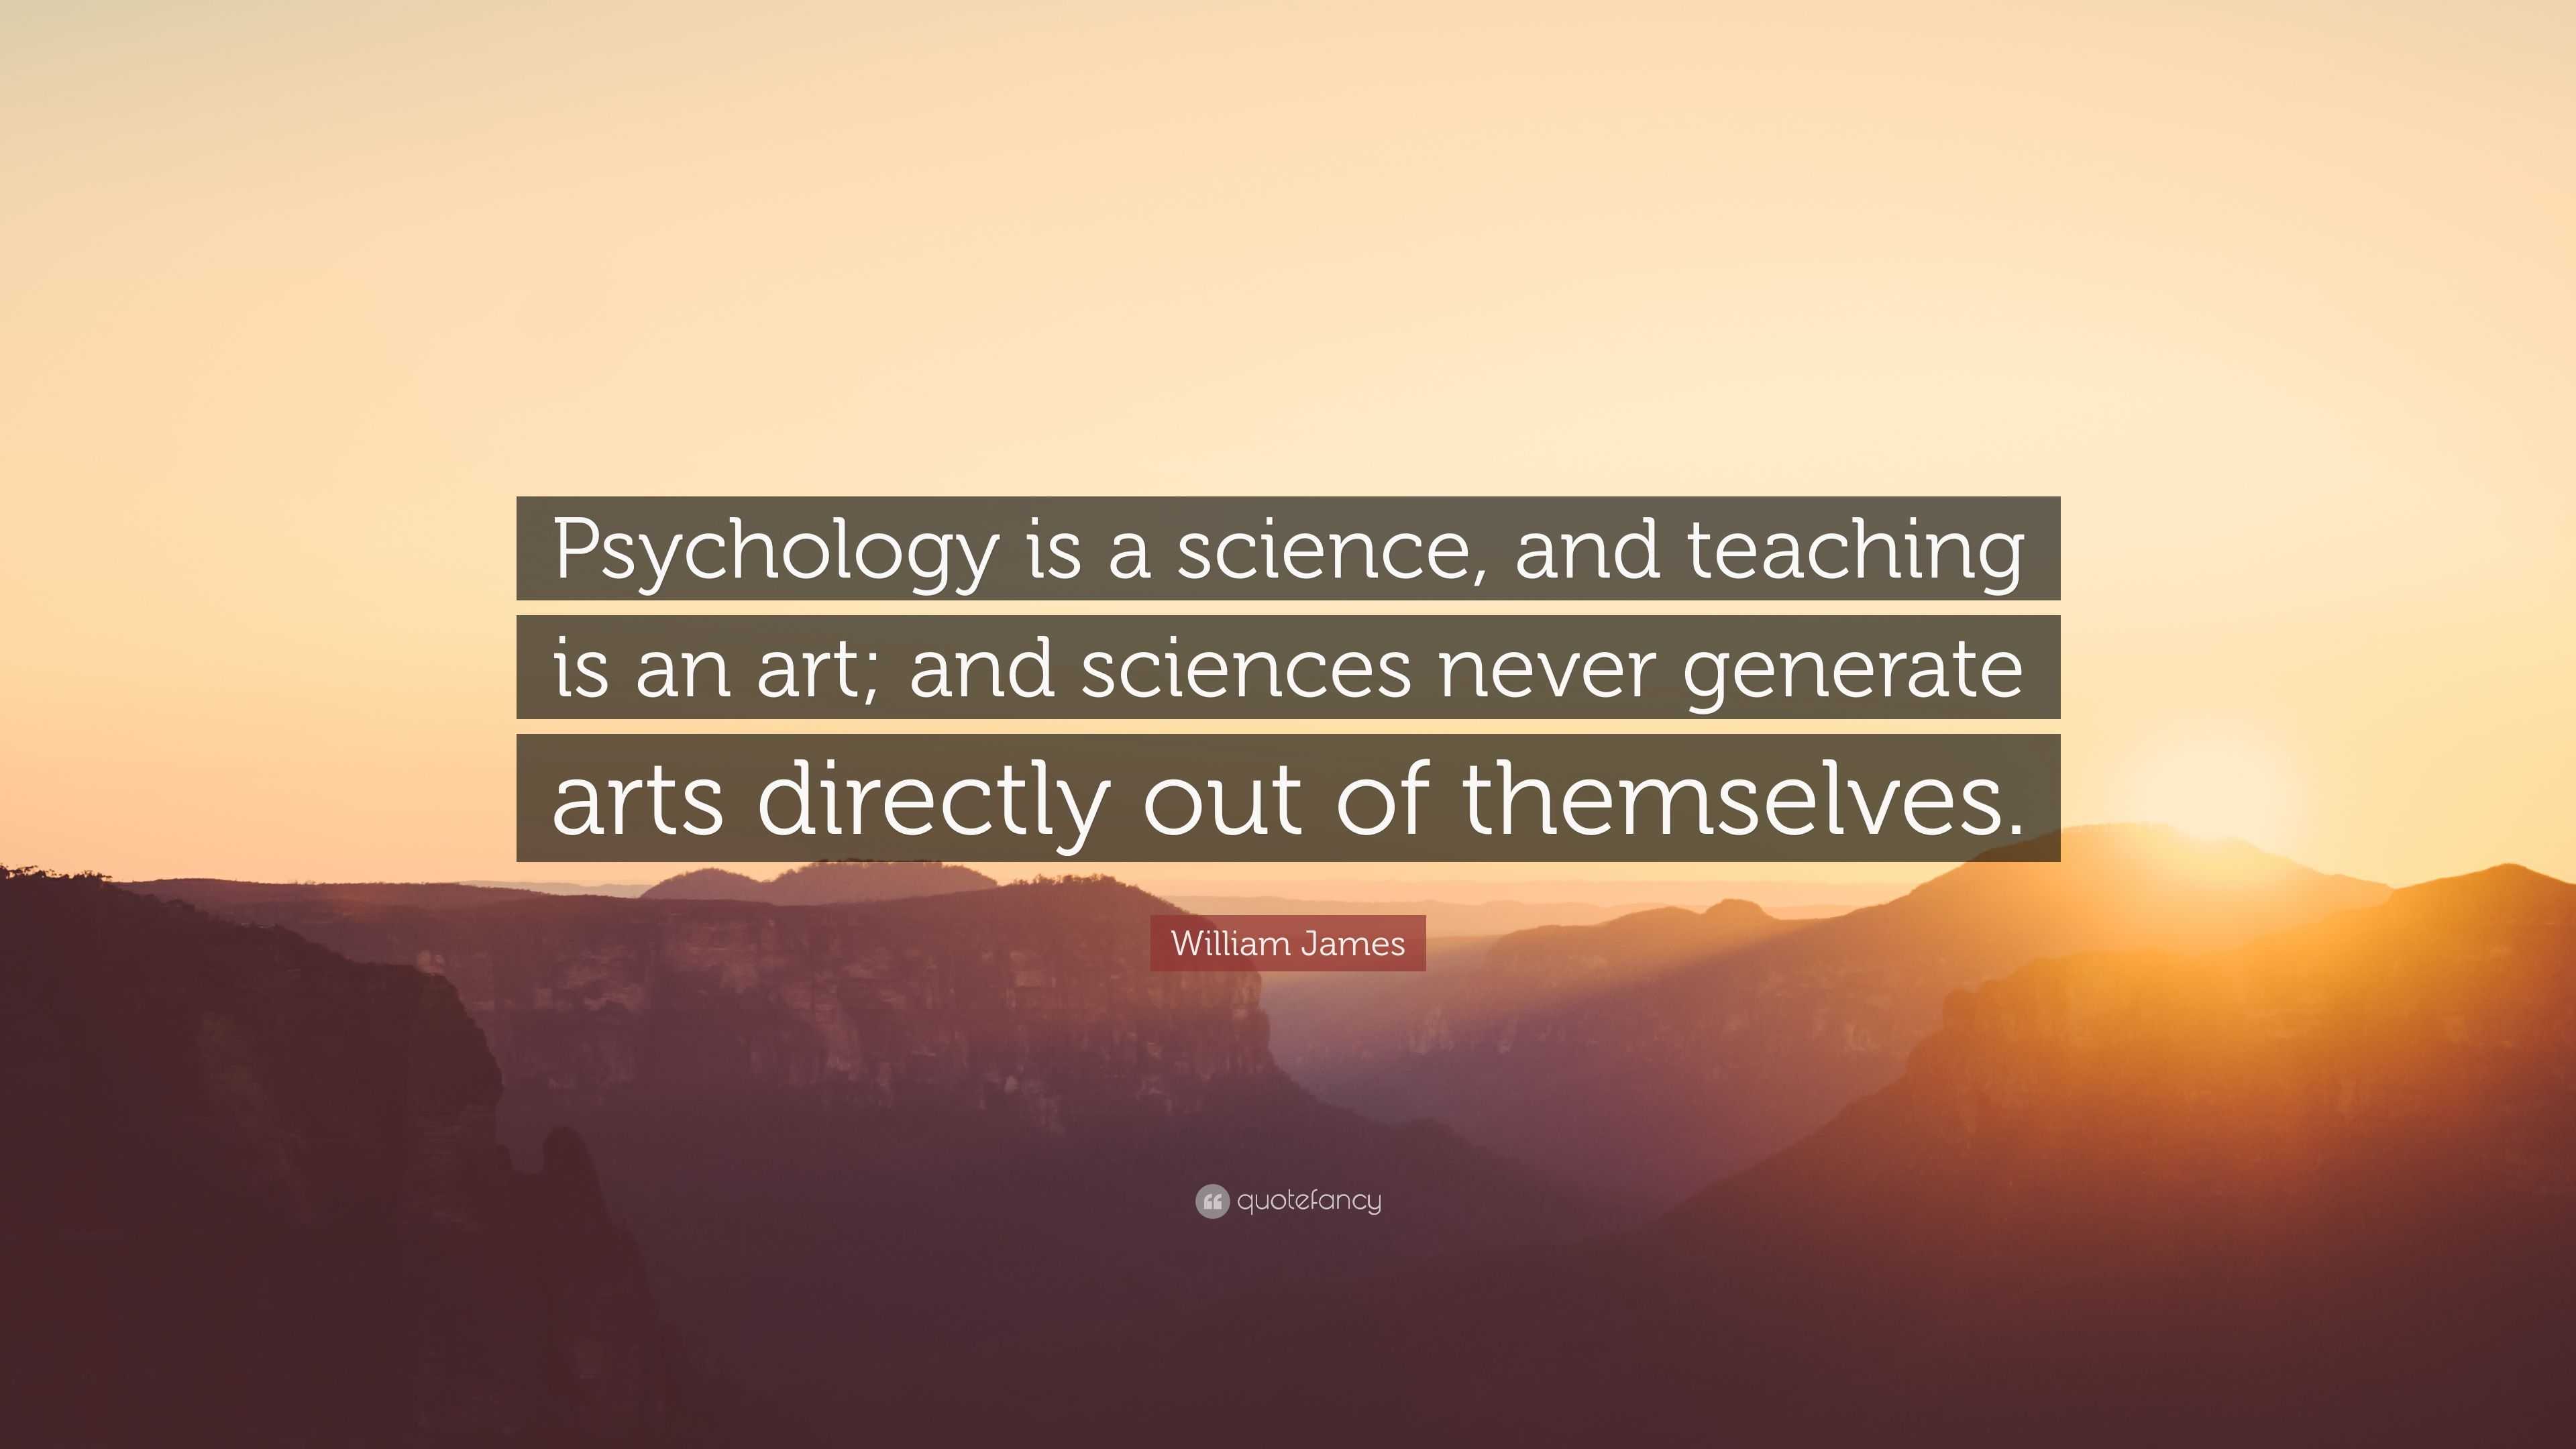 William James Quote: “Psychology is a science, and teaching is an art